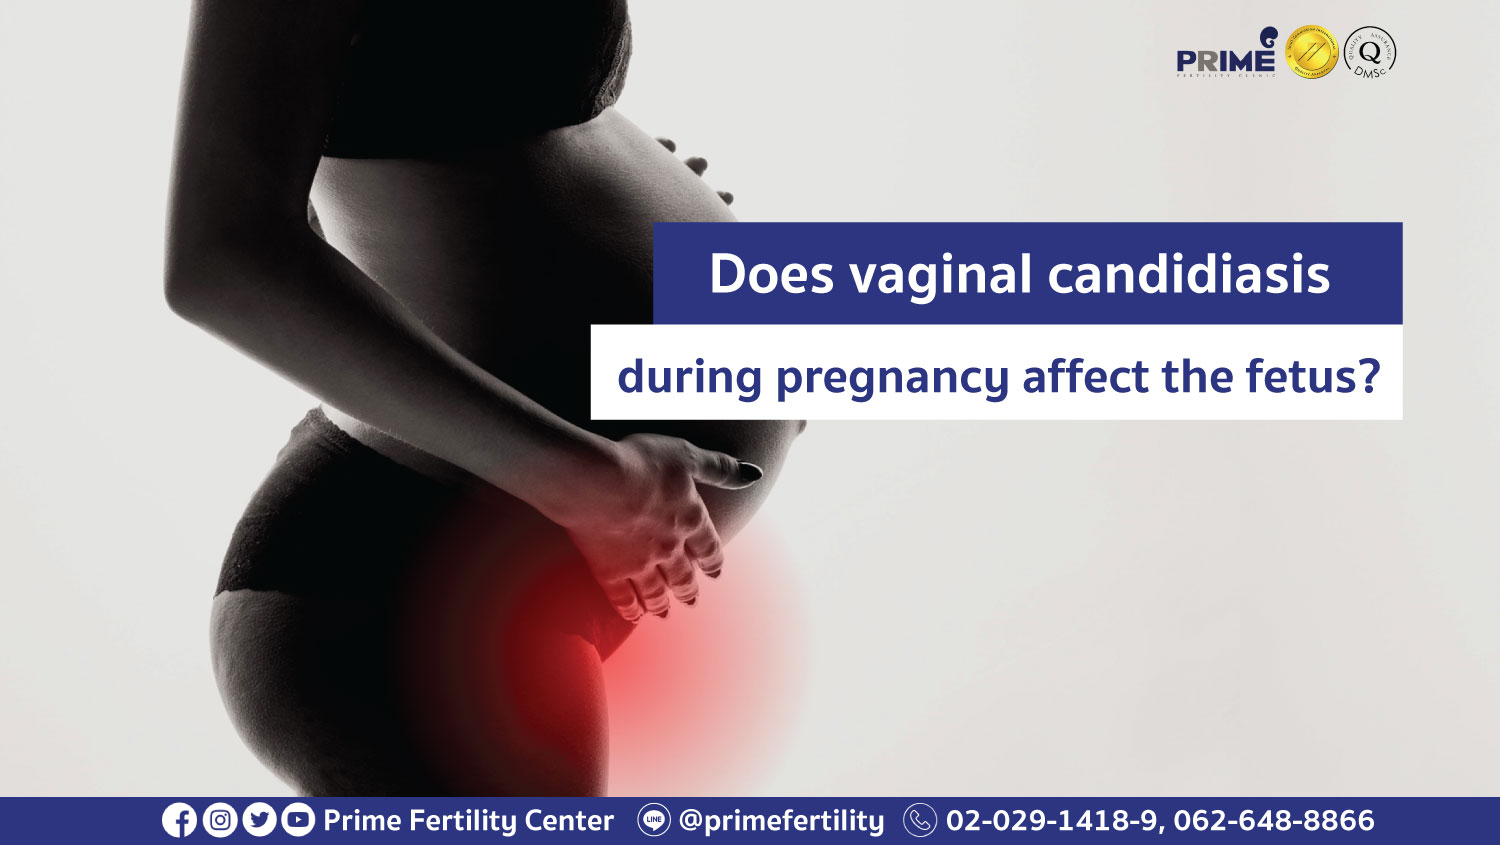 Does vaginal candidiasis during pregnancy affect the fetus?